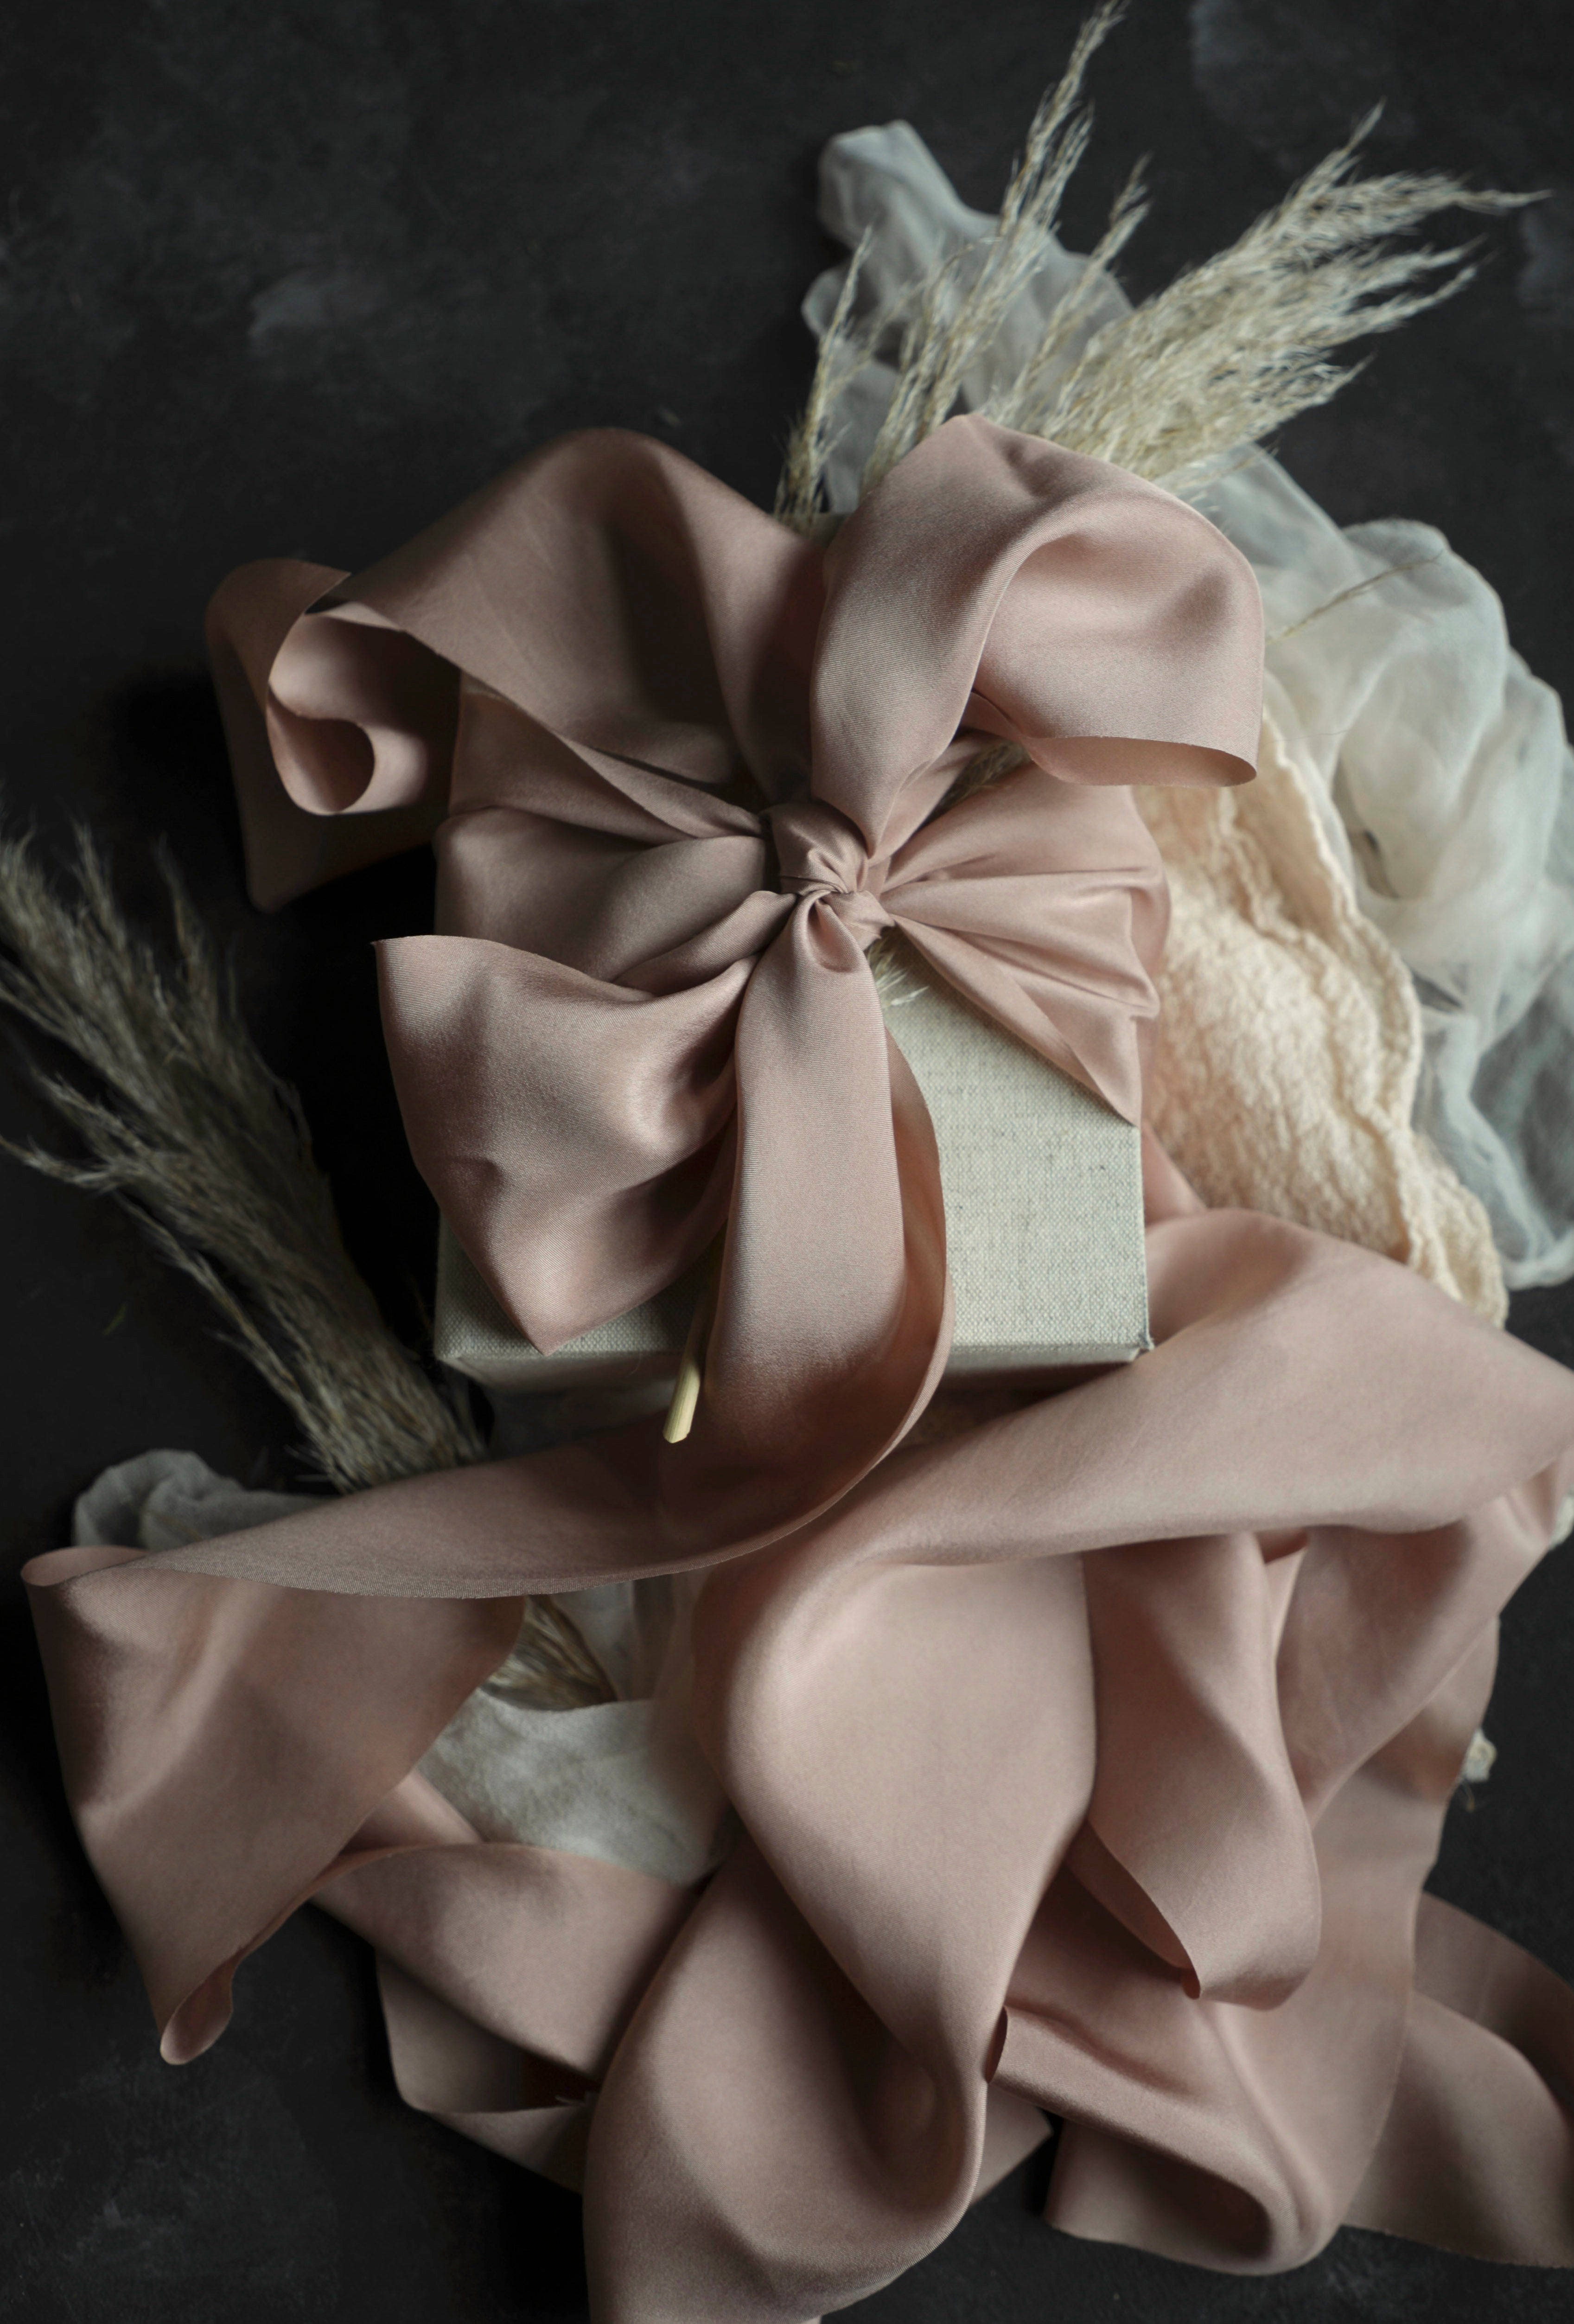 Blush Pink Chiffon Silk Ribbon Fabric Eco-Friendly Package for Wedding  Invitations, Bridal Bouquets, Decorations, Gifts Wrapping & Bow Making  Light